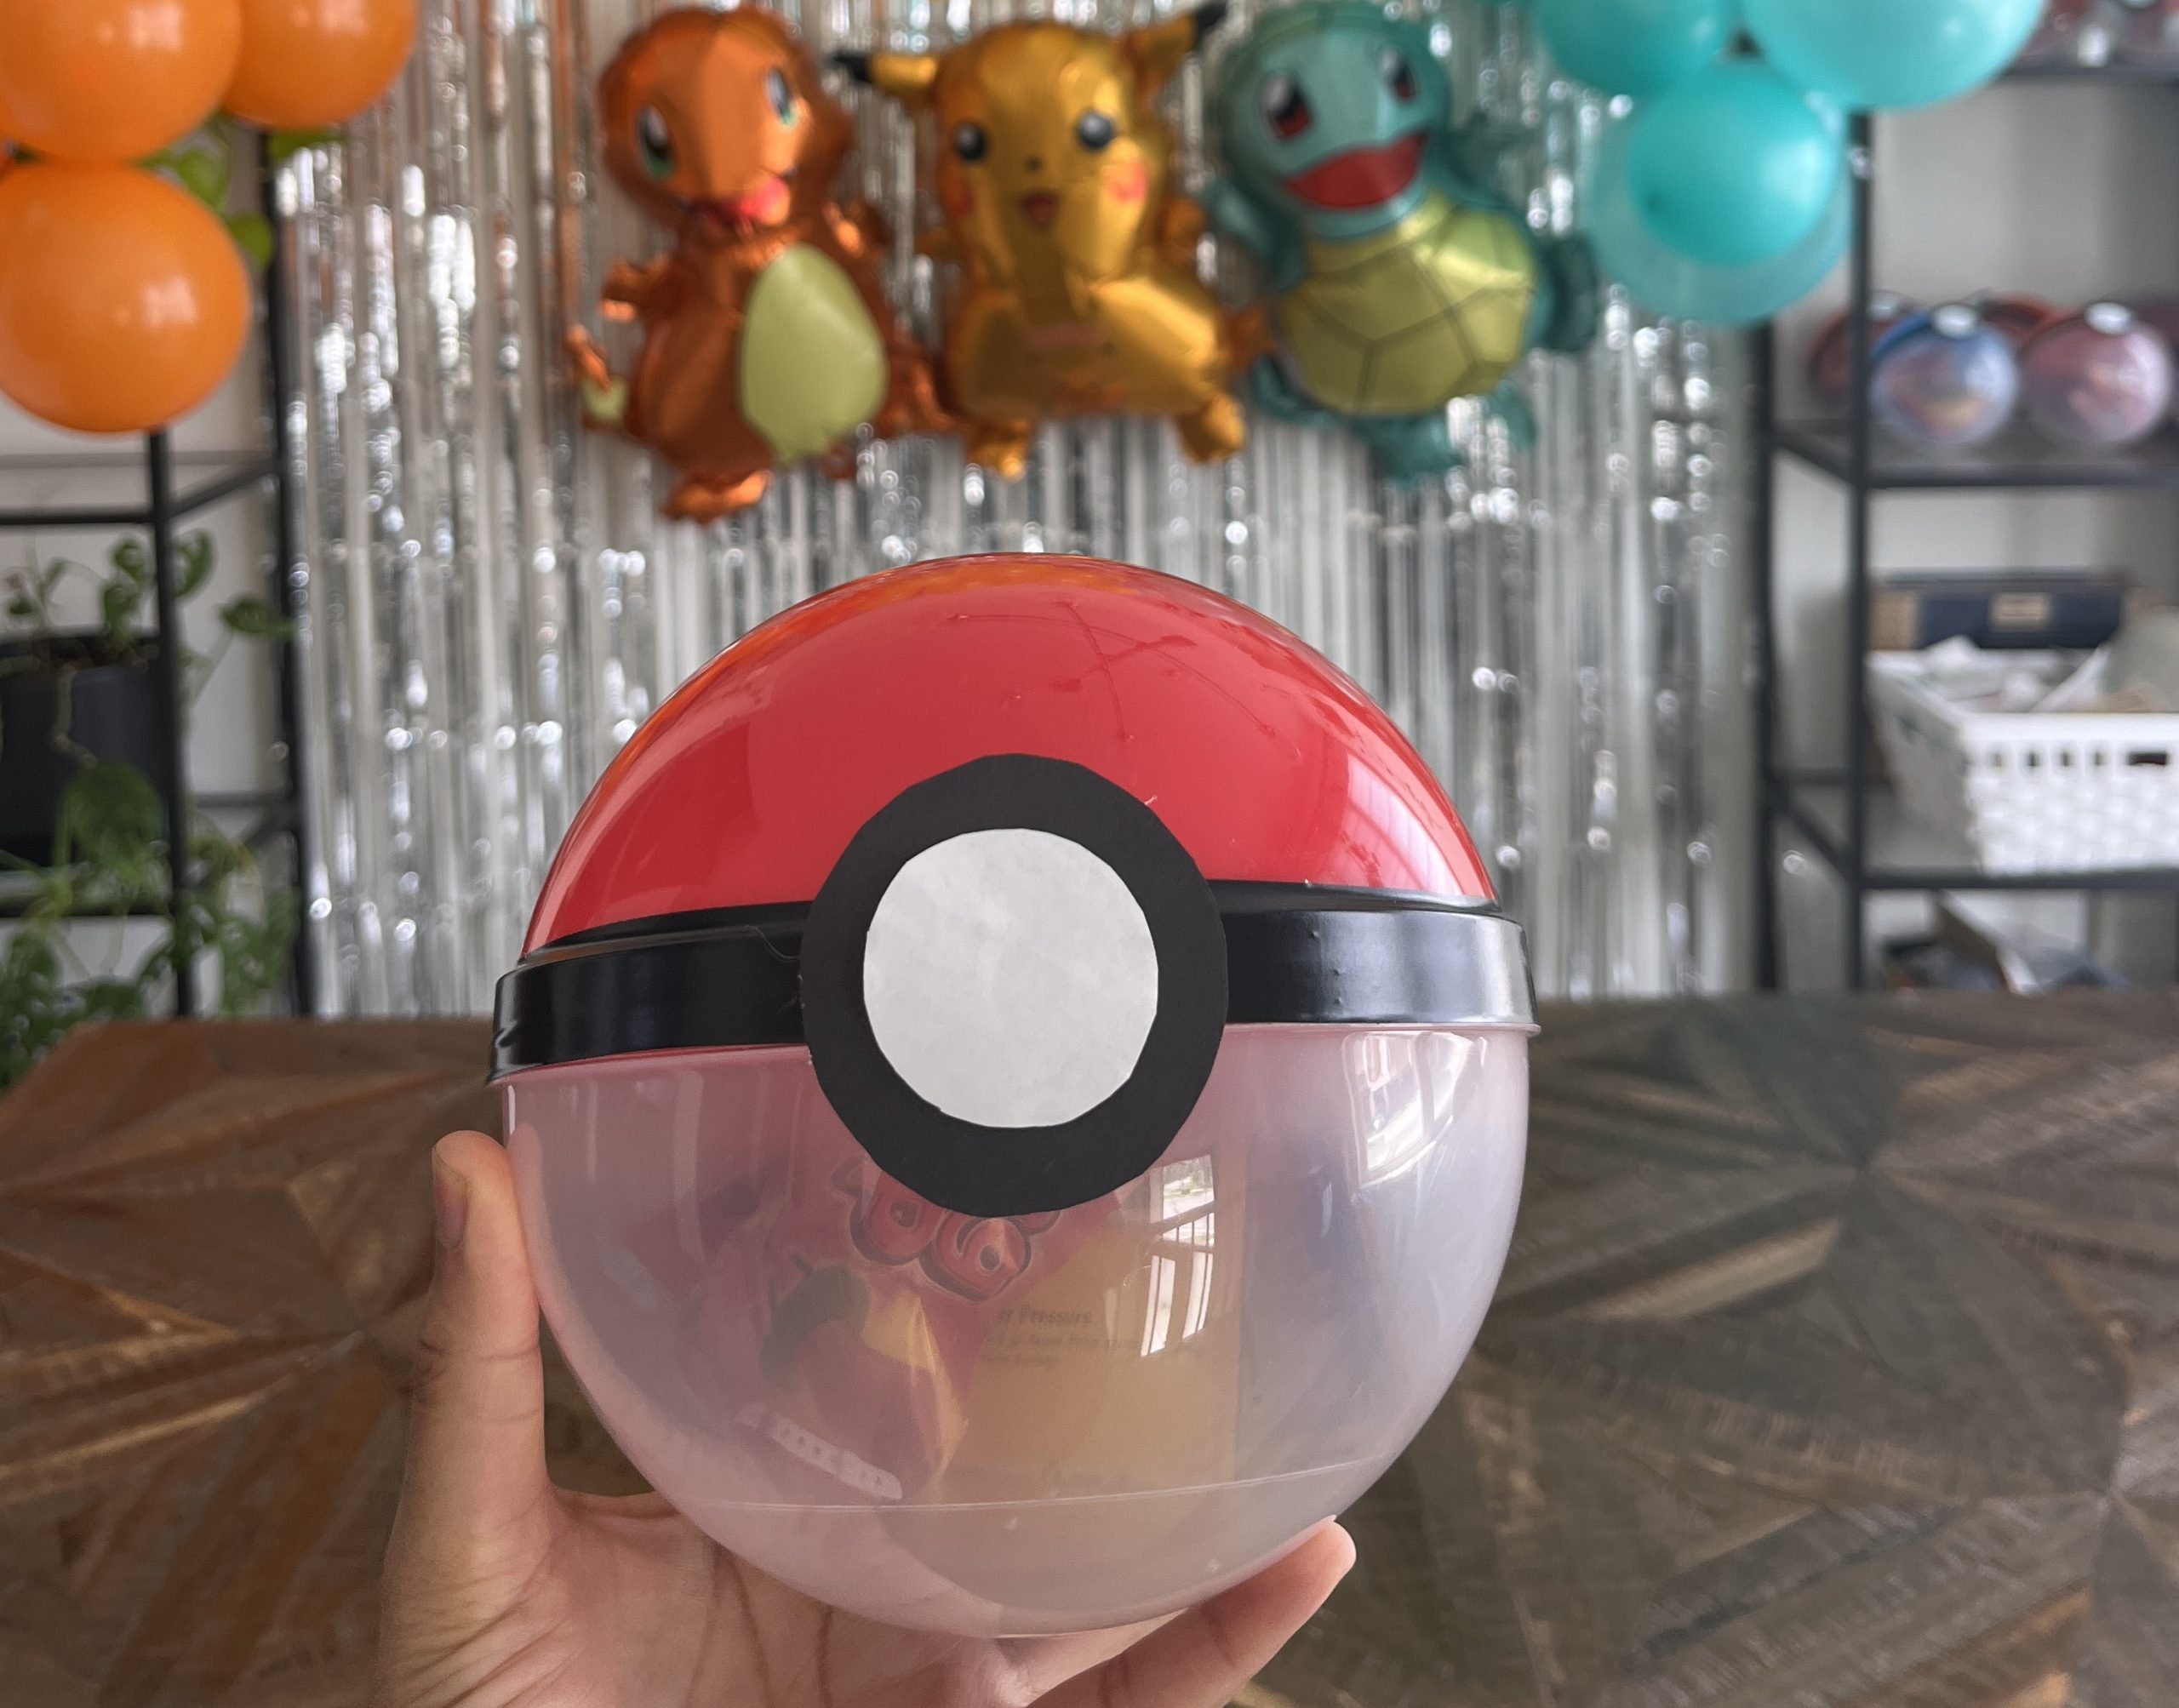 Would you like this new type of Poké Ball, the Type Ball? : r/pokemon